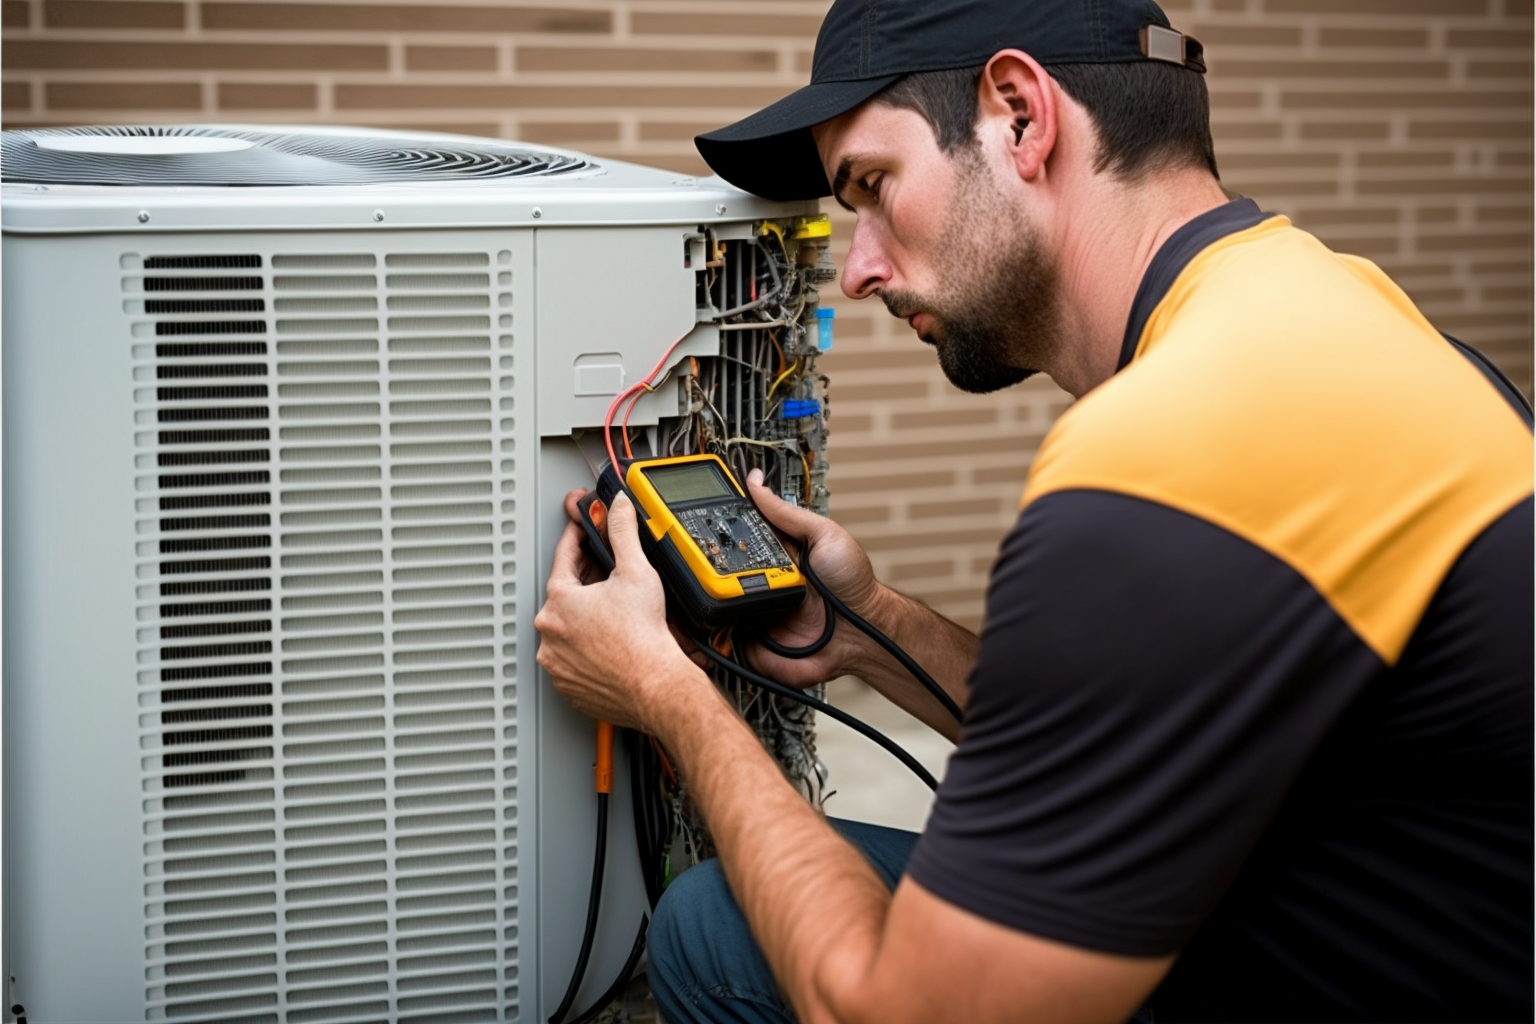 Growing Air Conditioning and Home Services Need In The Woodlands, Magnolia and Surrounding Communities.